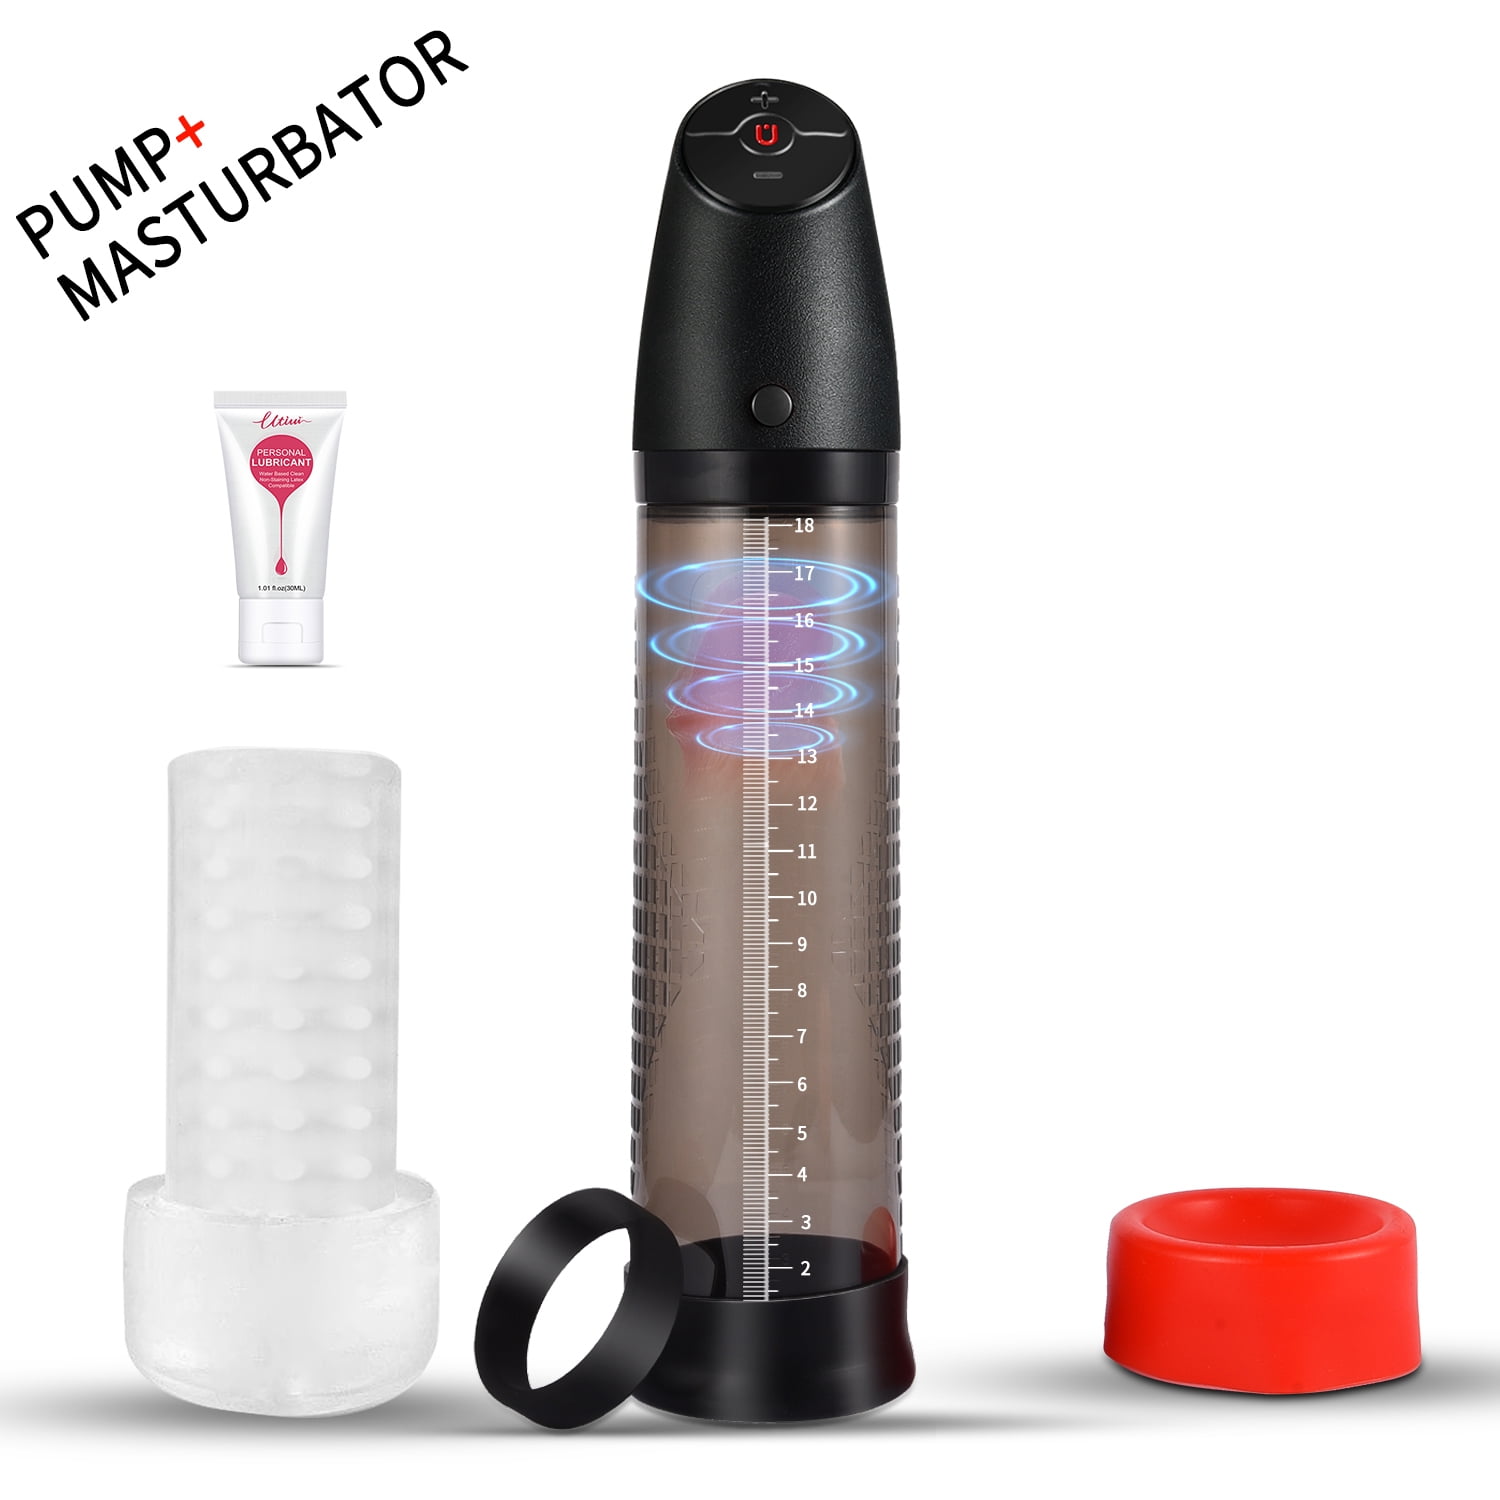 vacume cleaner penis pumps homemade